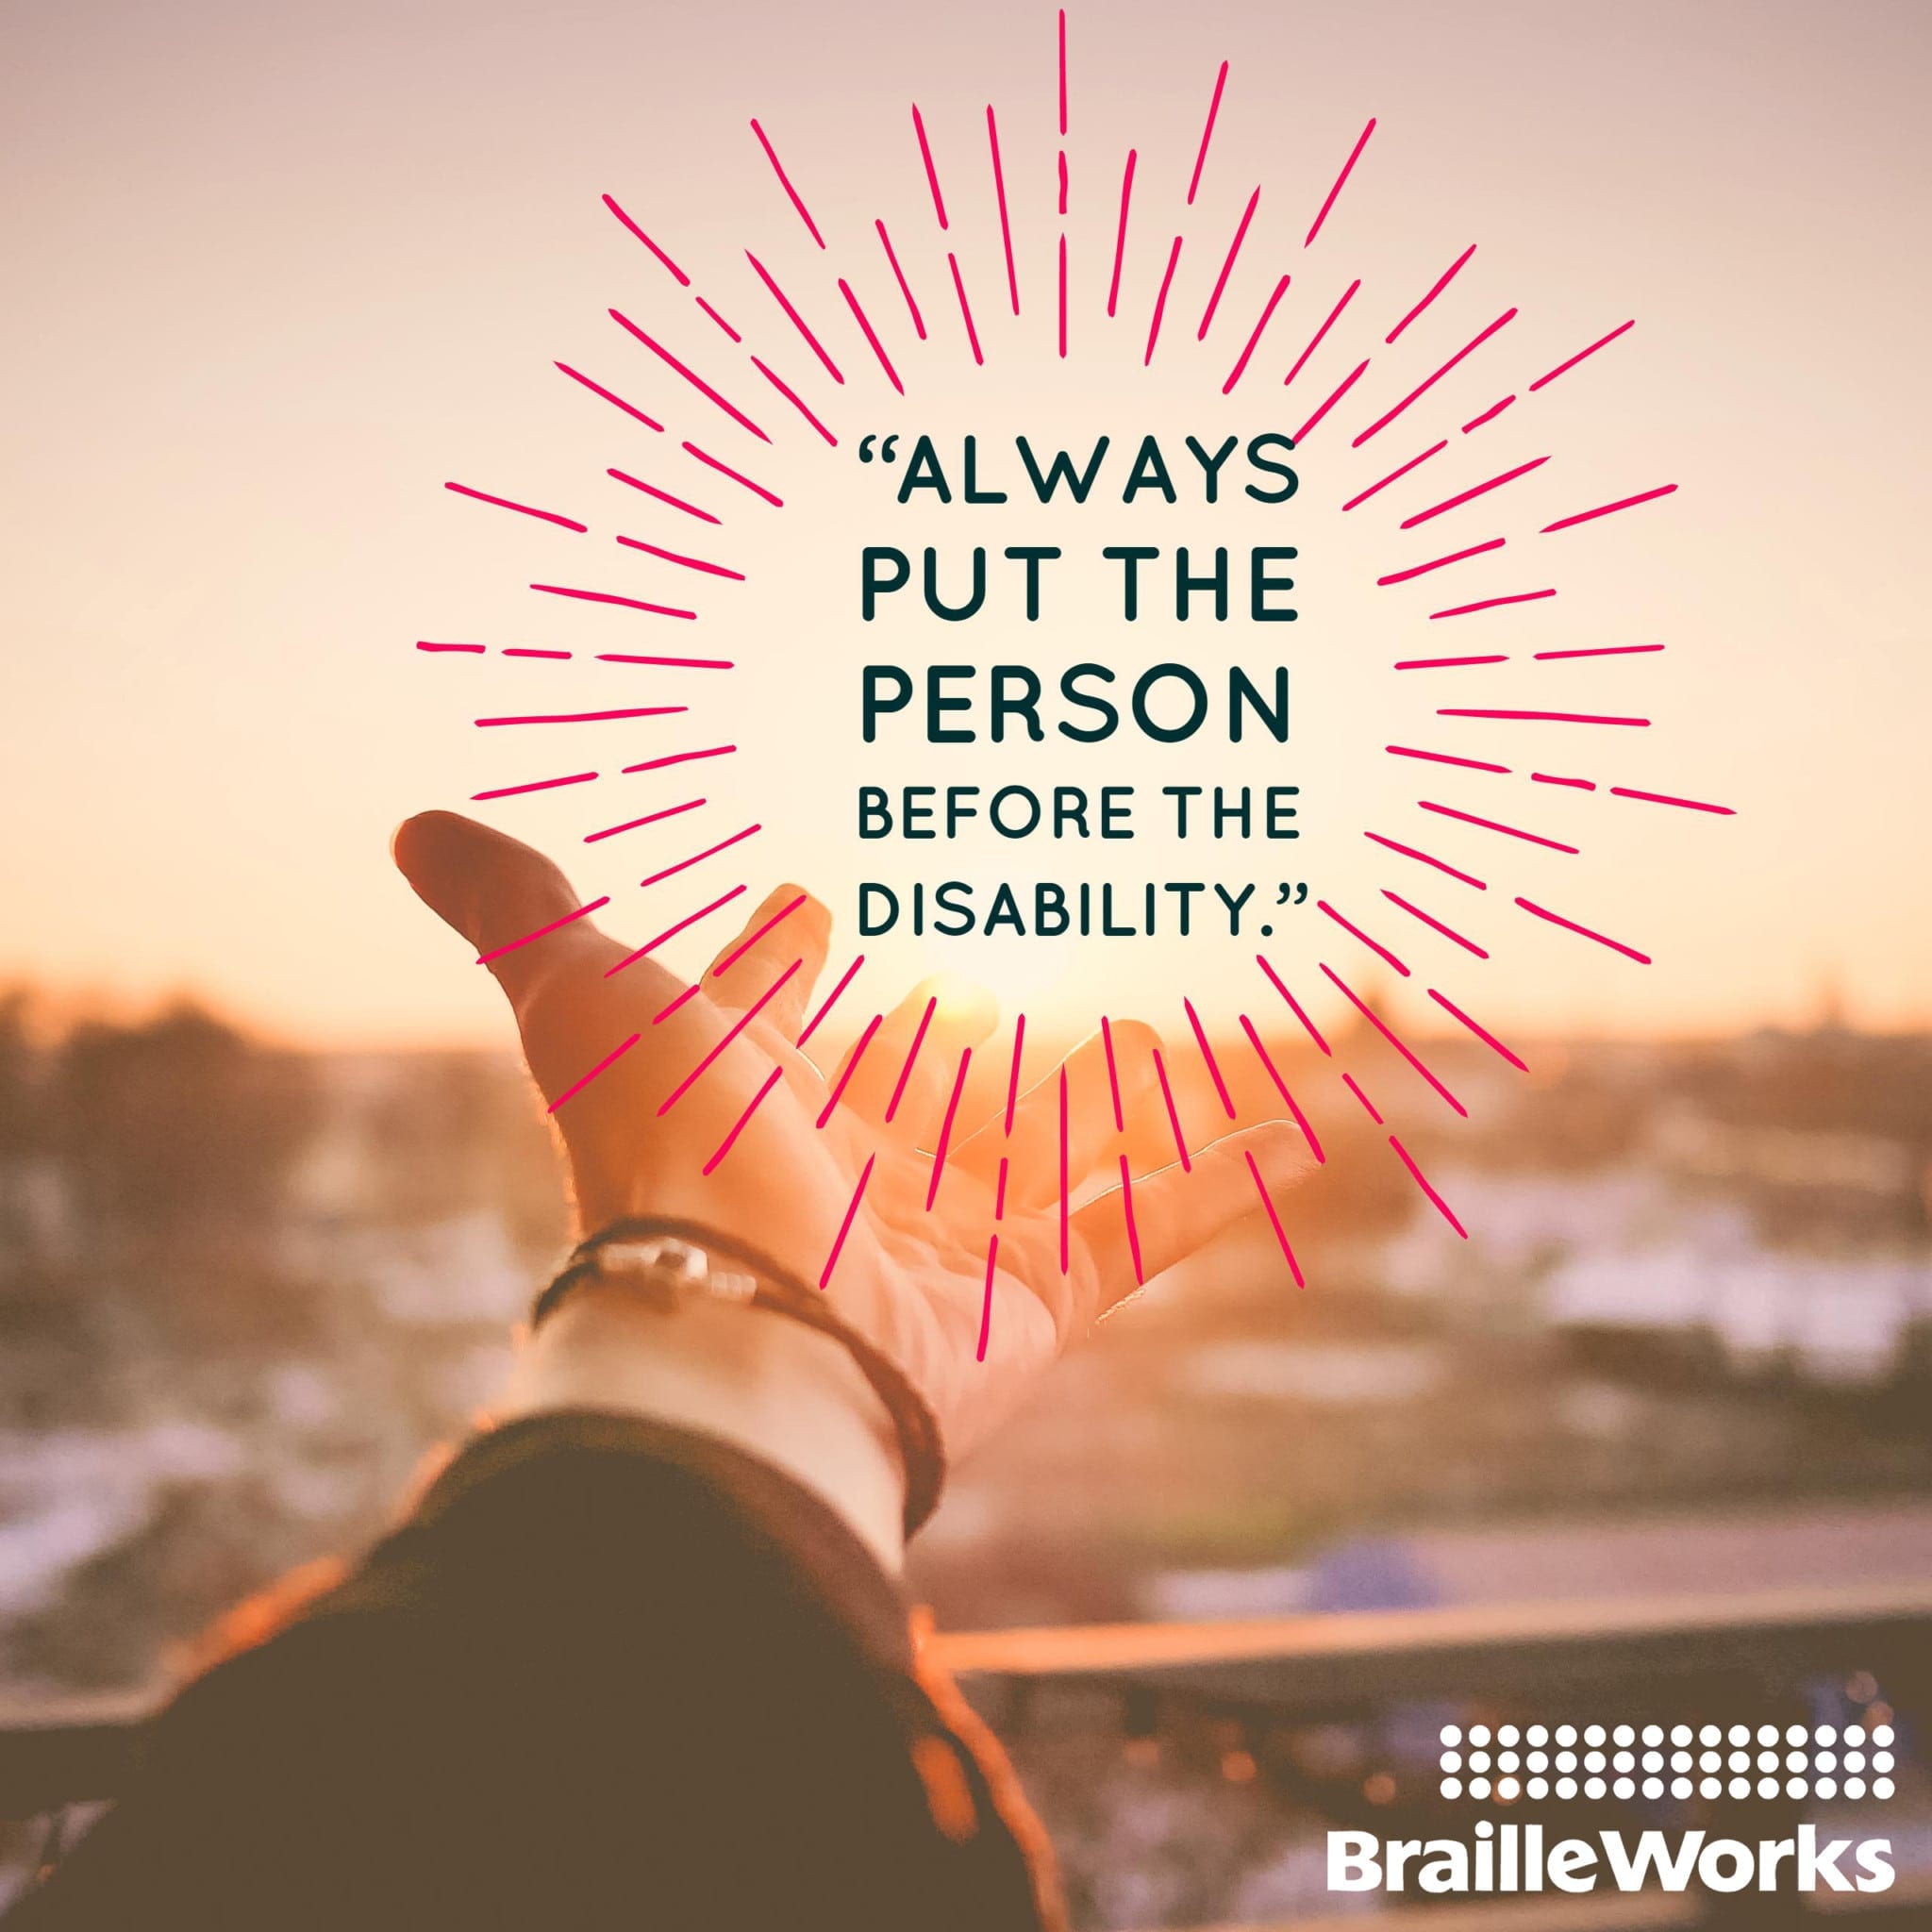 Hand reaching out to the sun with a text overlay reading "Always put the person before the disability."